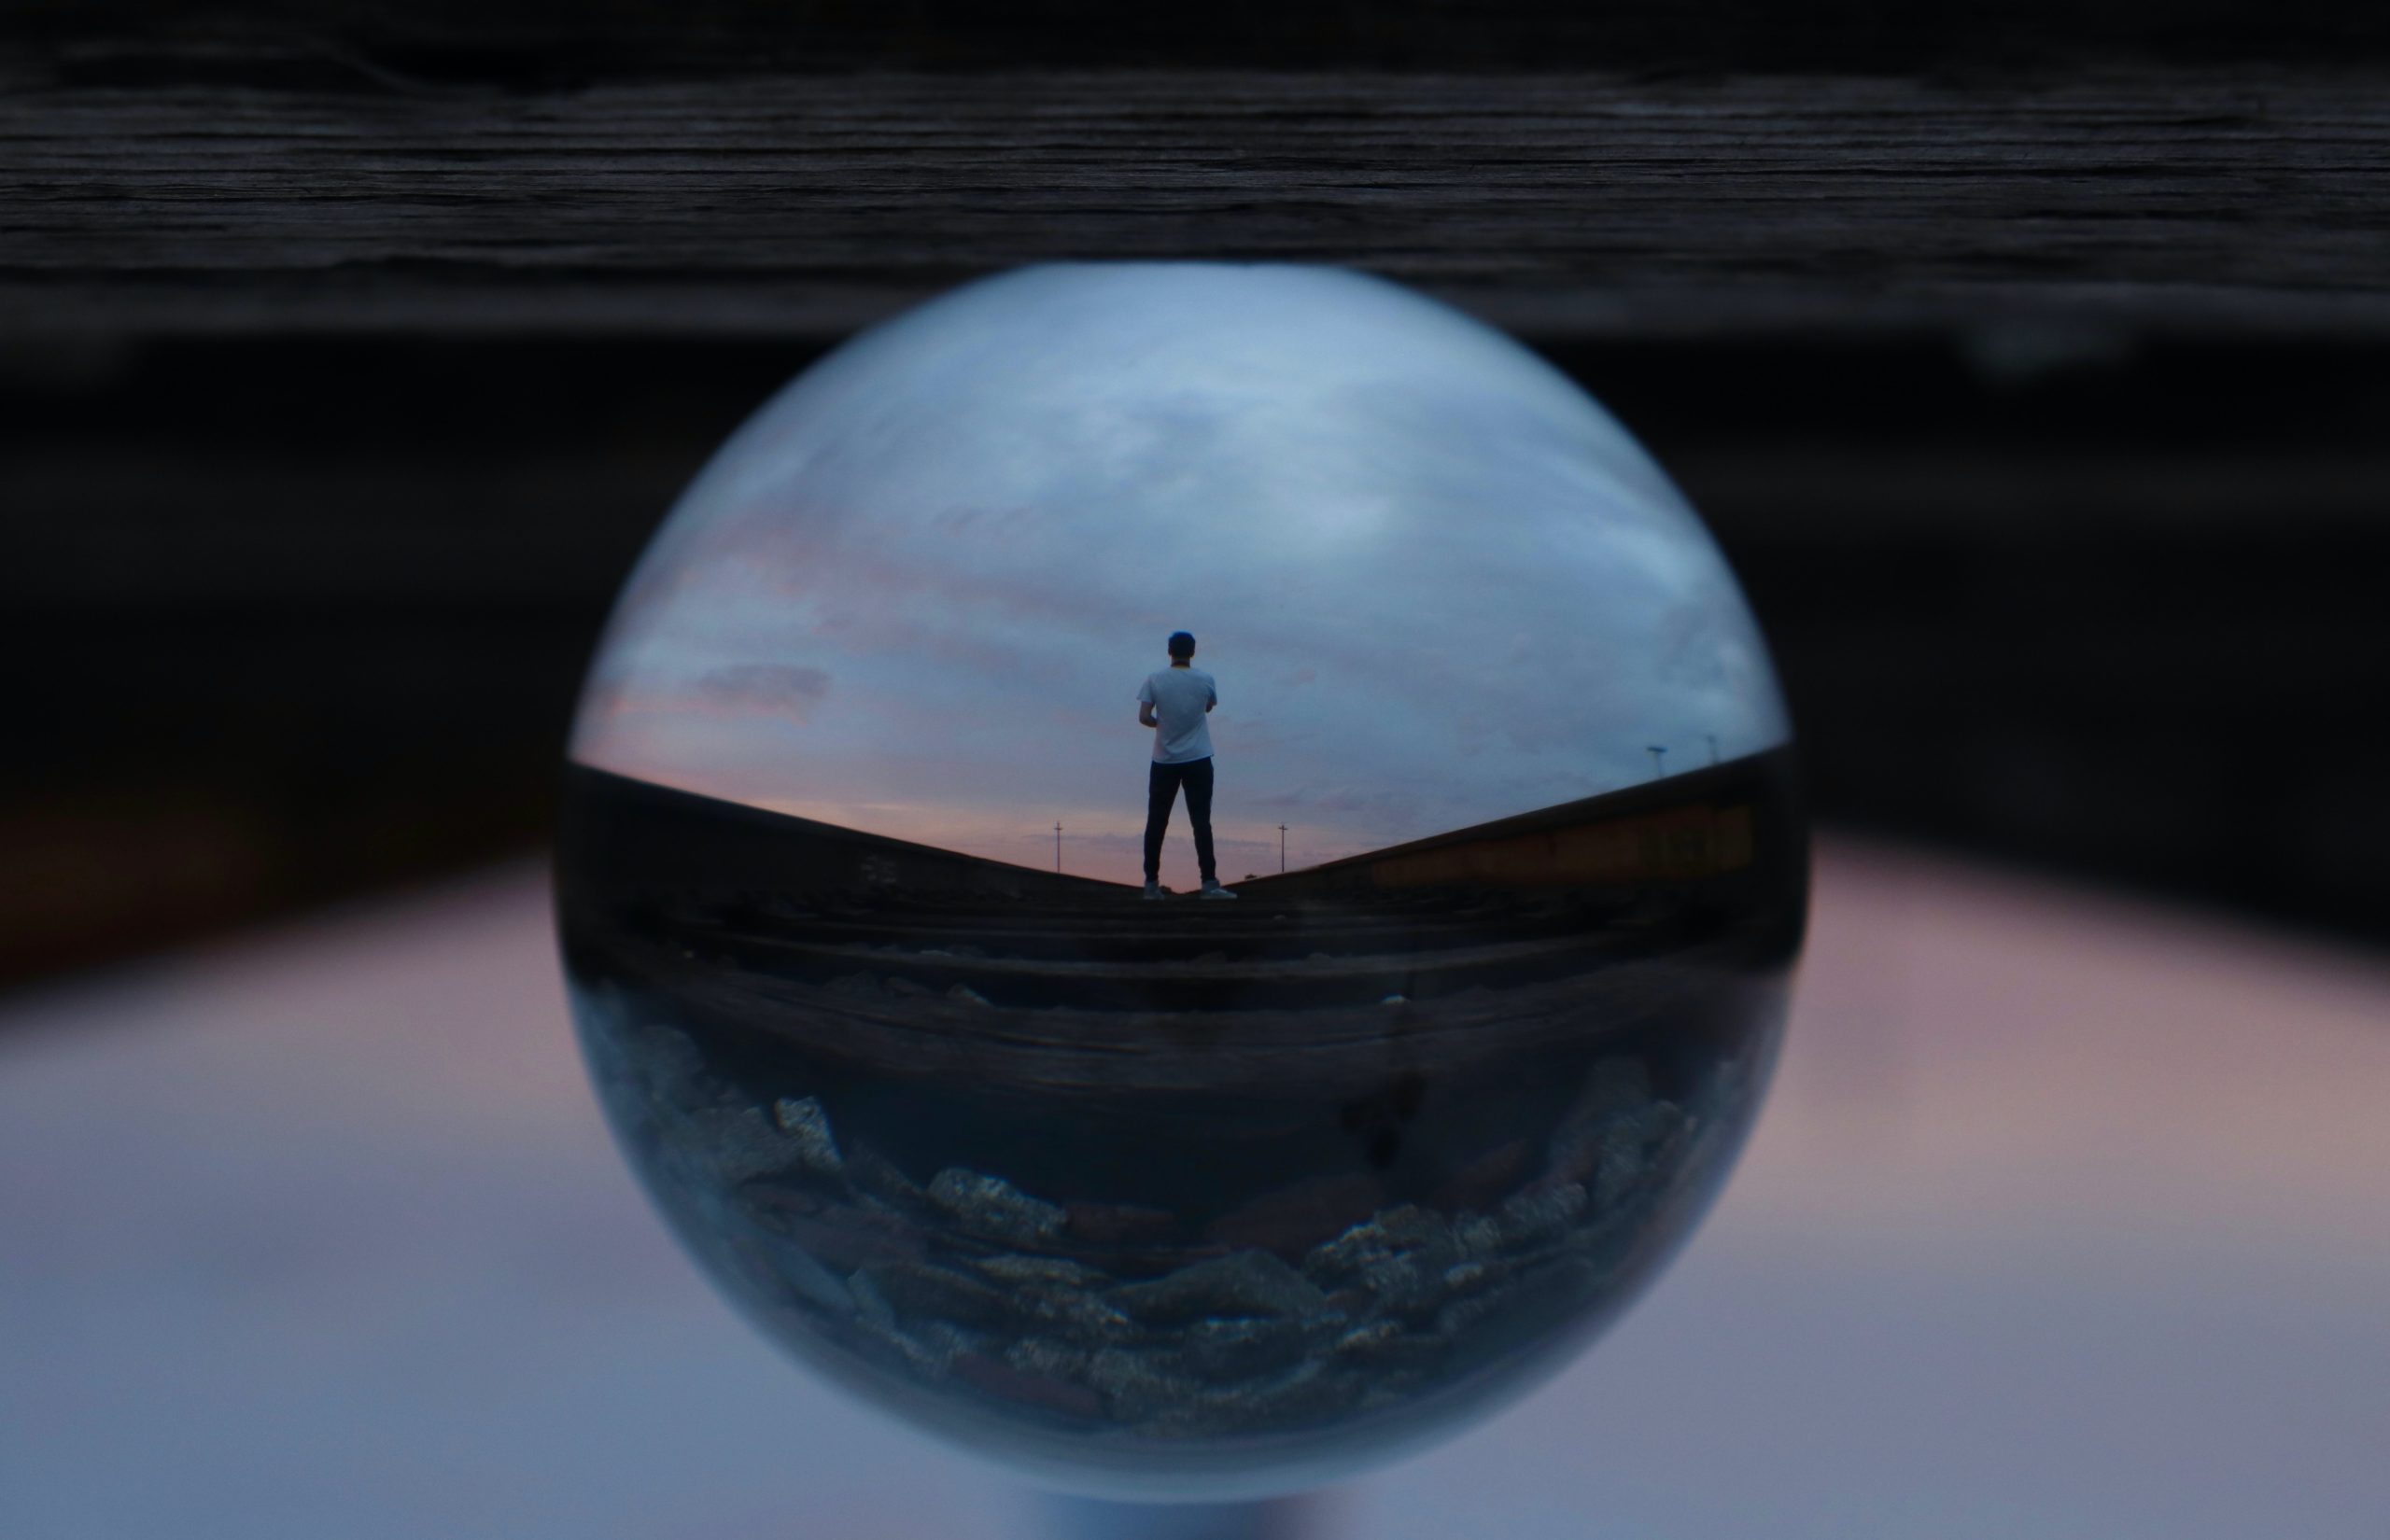 This image shows a person standing with proud body-language in nature, reflected in a ball